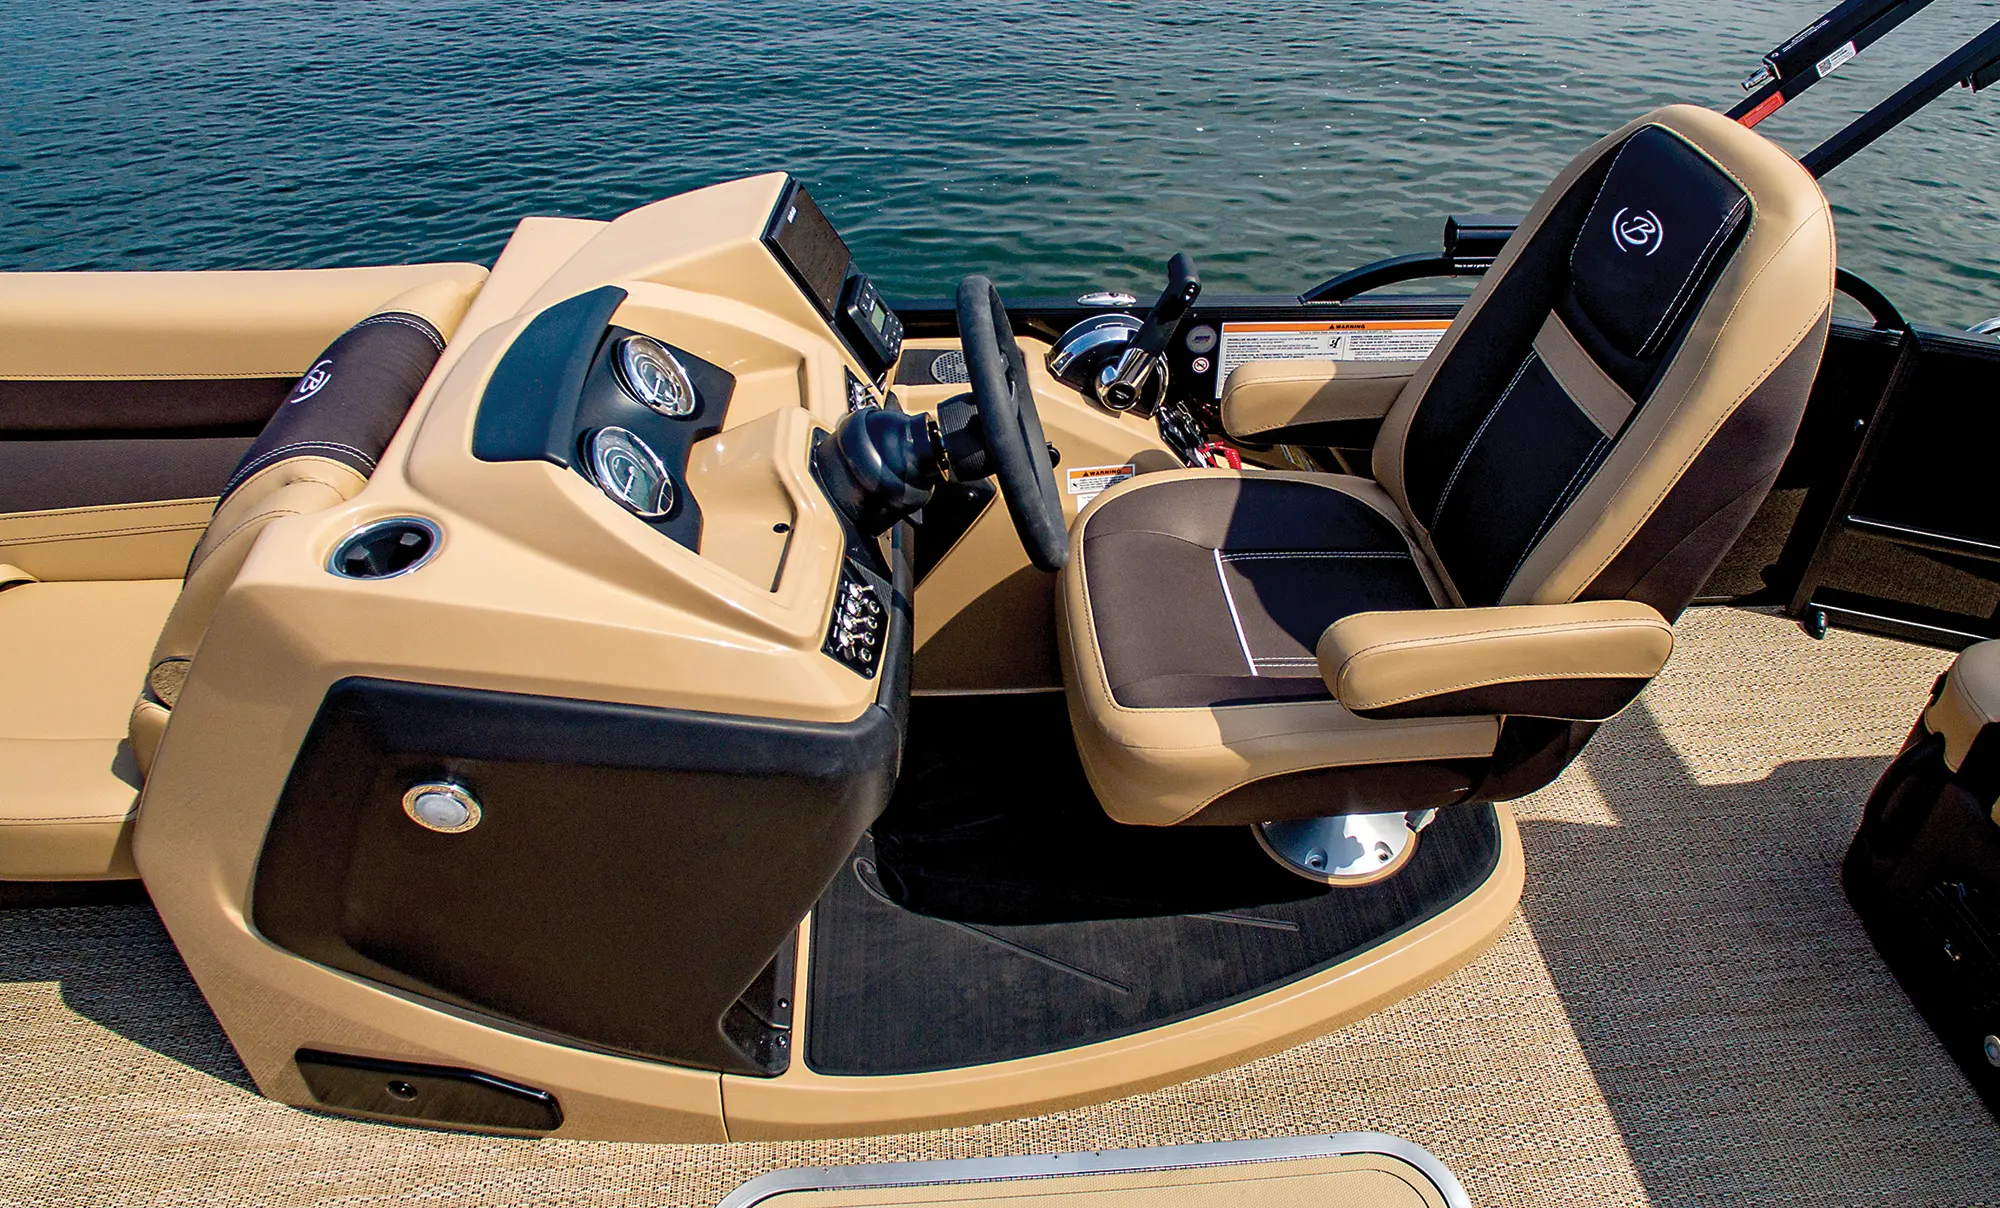 Landscape close-up side photograph view of the Barletta Cabrio C22UC pontoon motorboat vehicle's driver side seat area